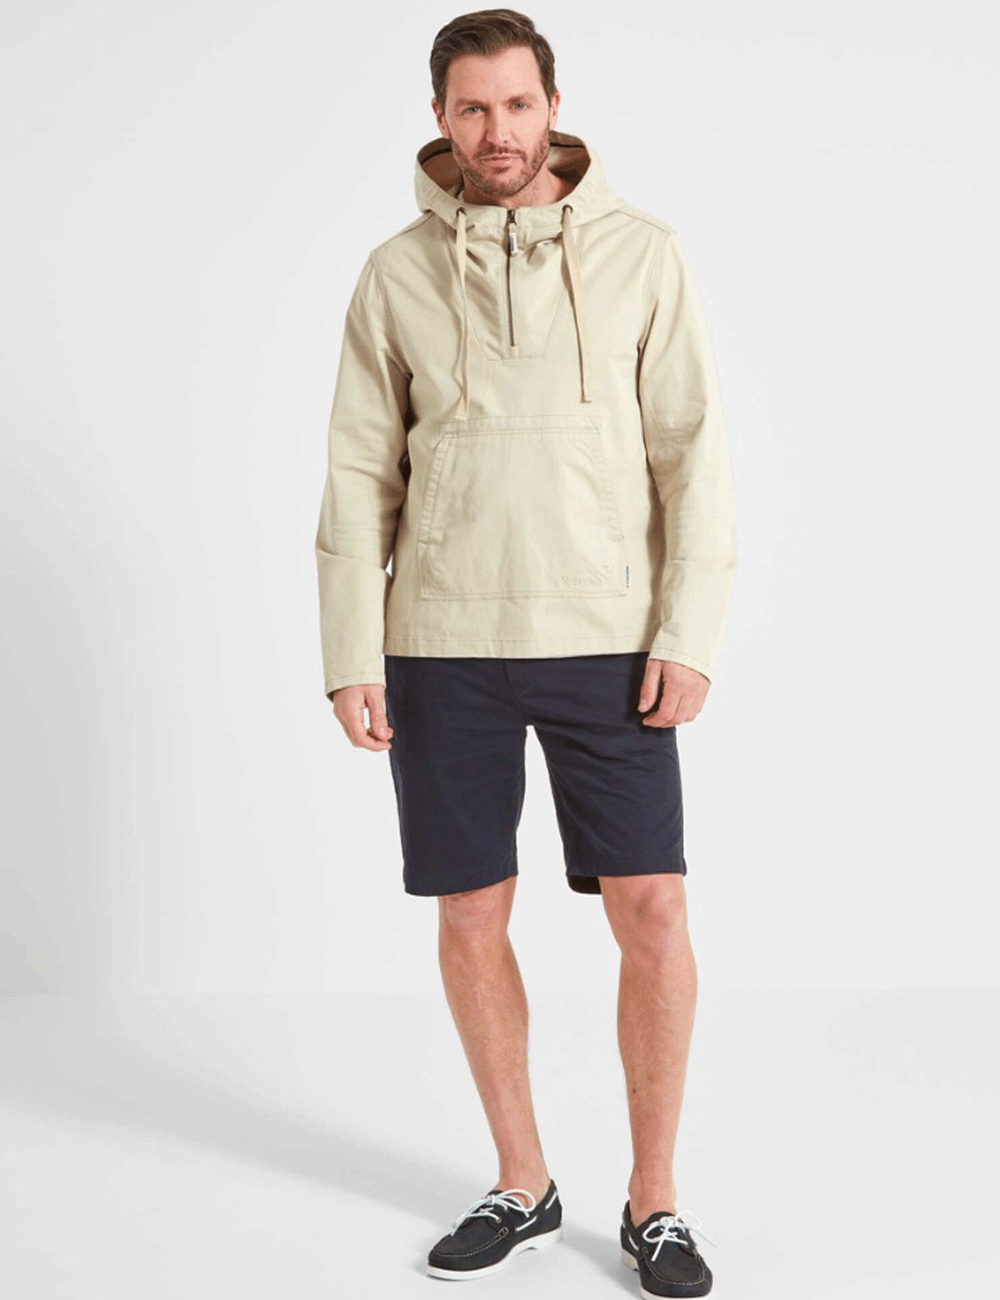 Man wearing the Harbour Smock with navy shorts